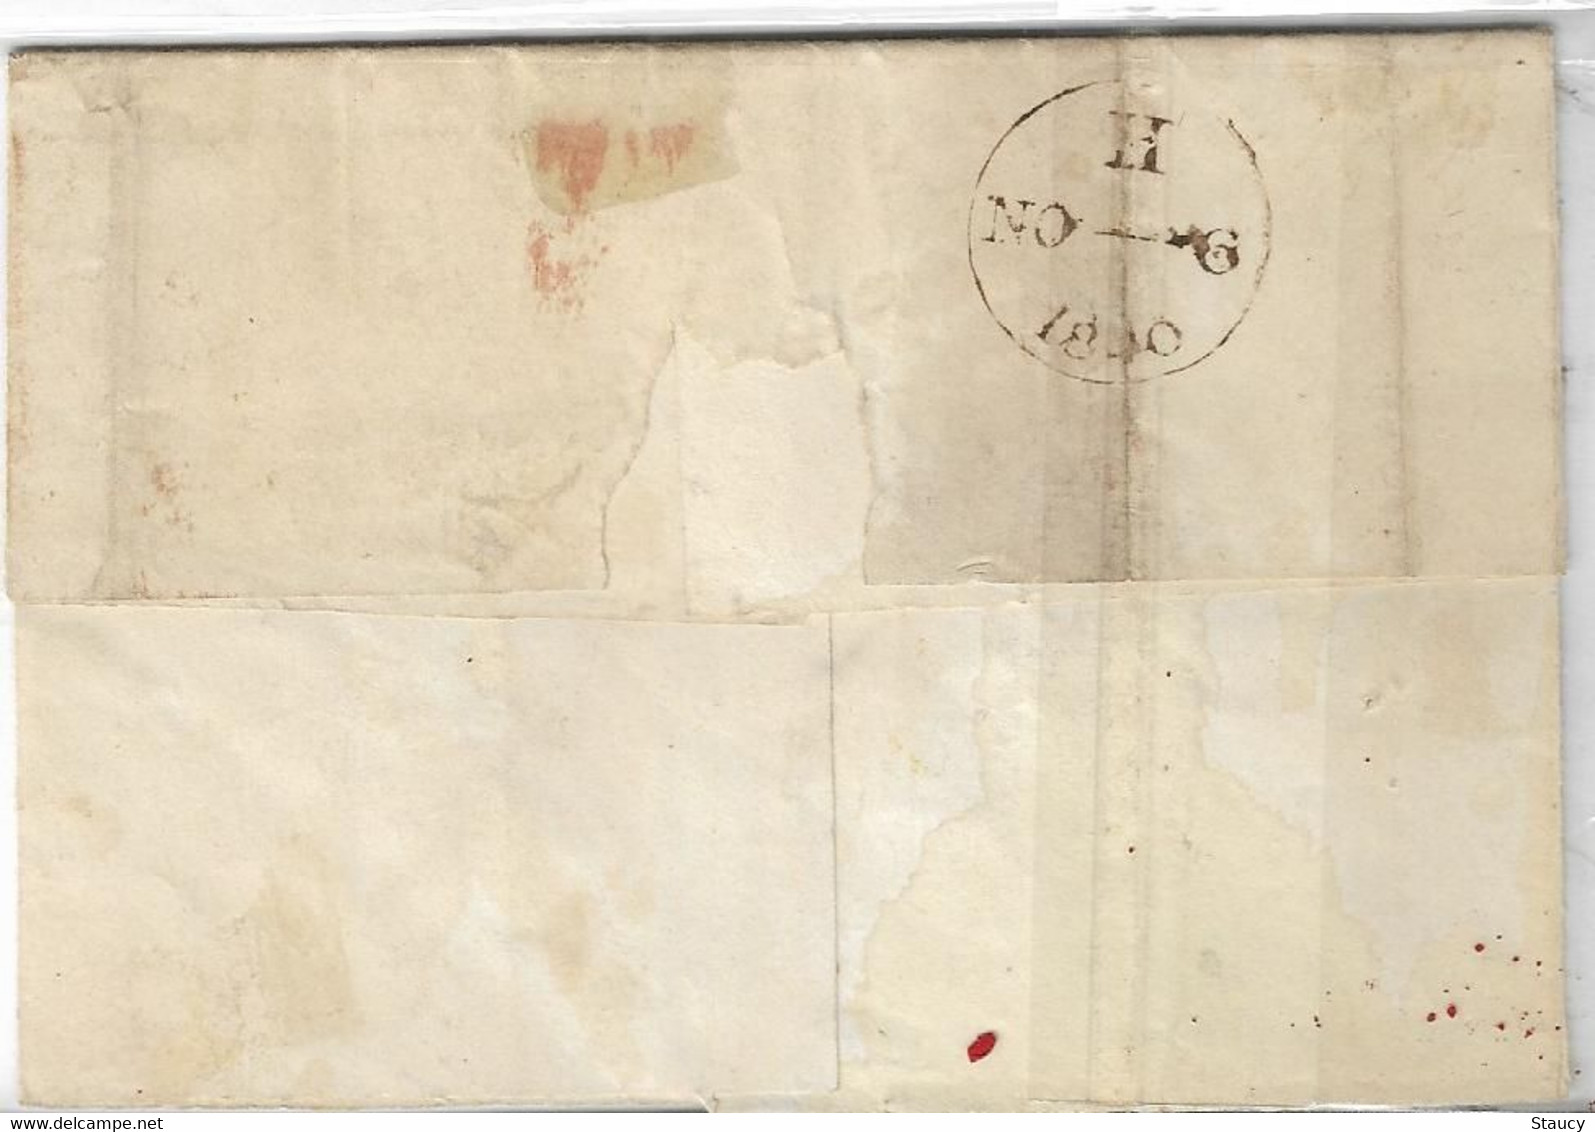 UK GB GREAT BRITAIN 1840 SG1 One Penny Black On Cover ....? To Warwickshire (PH) Used As Per Scan - Briefe U. Dokumente